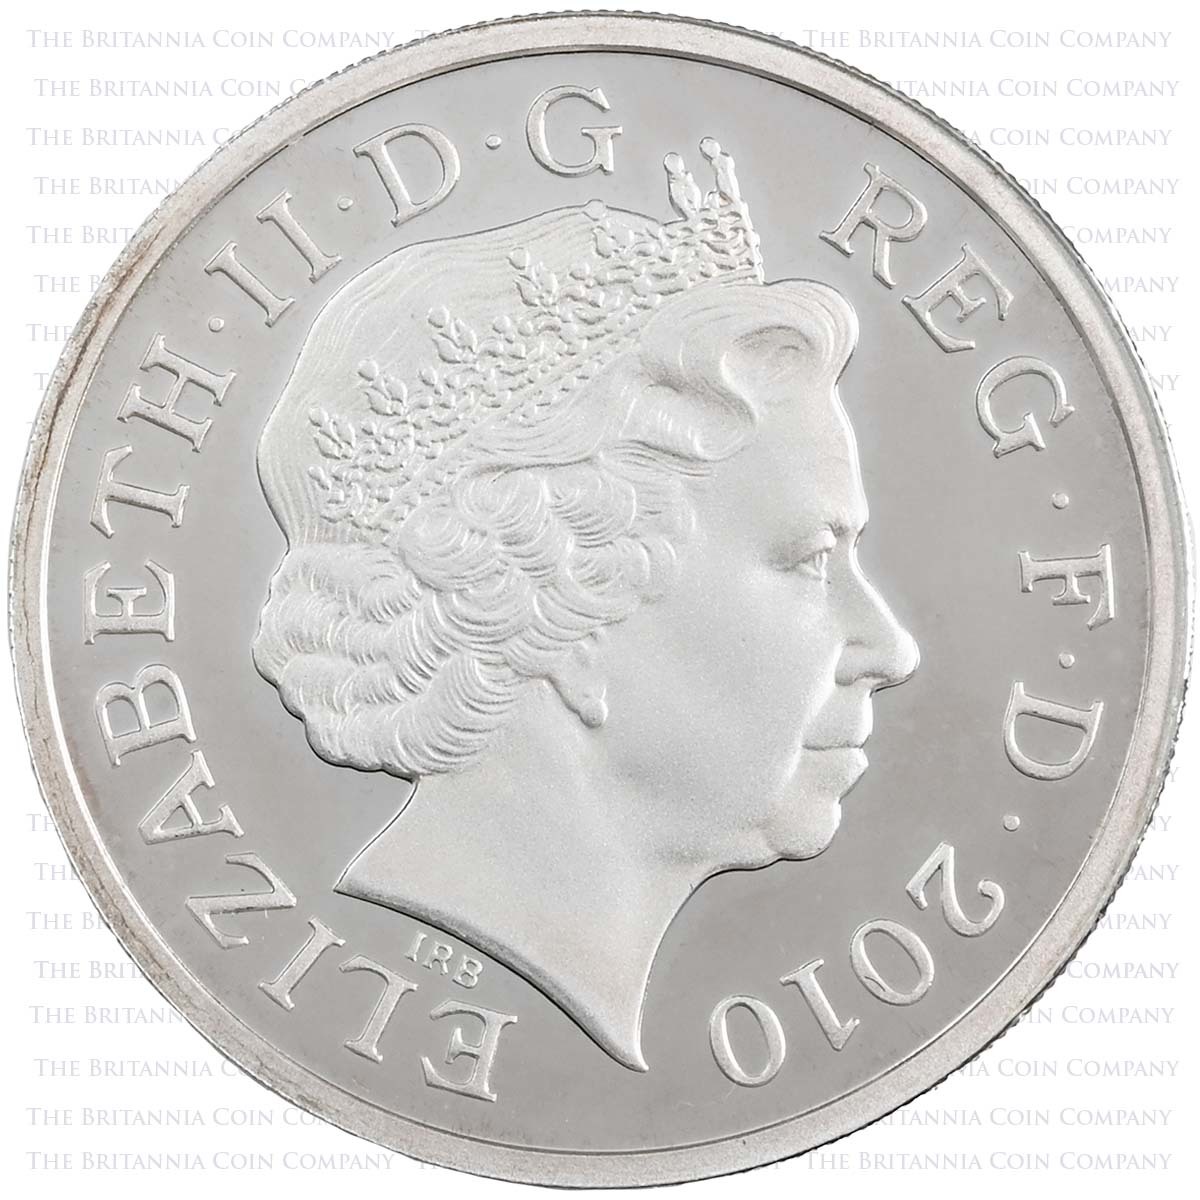 UK10NISP 2010 Capital Cities Belfast One Pound Silver Proof Coin Obverse